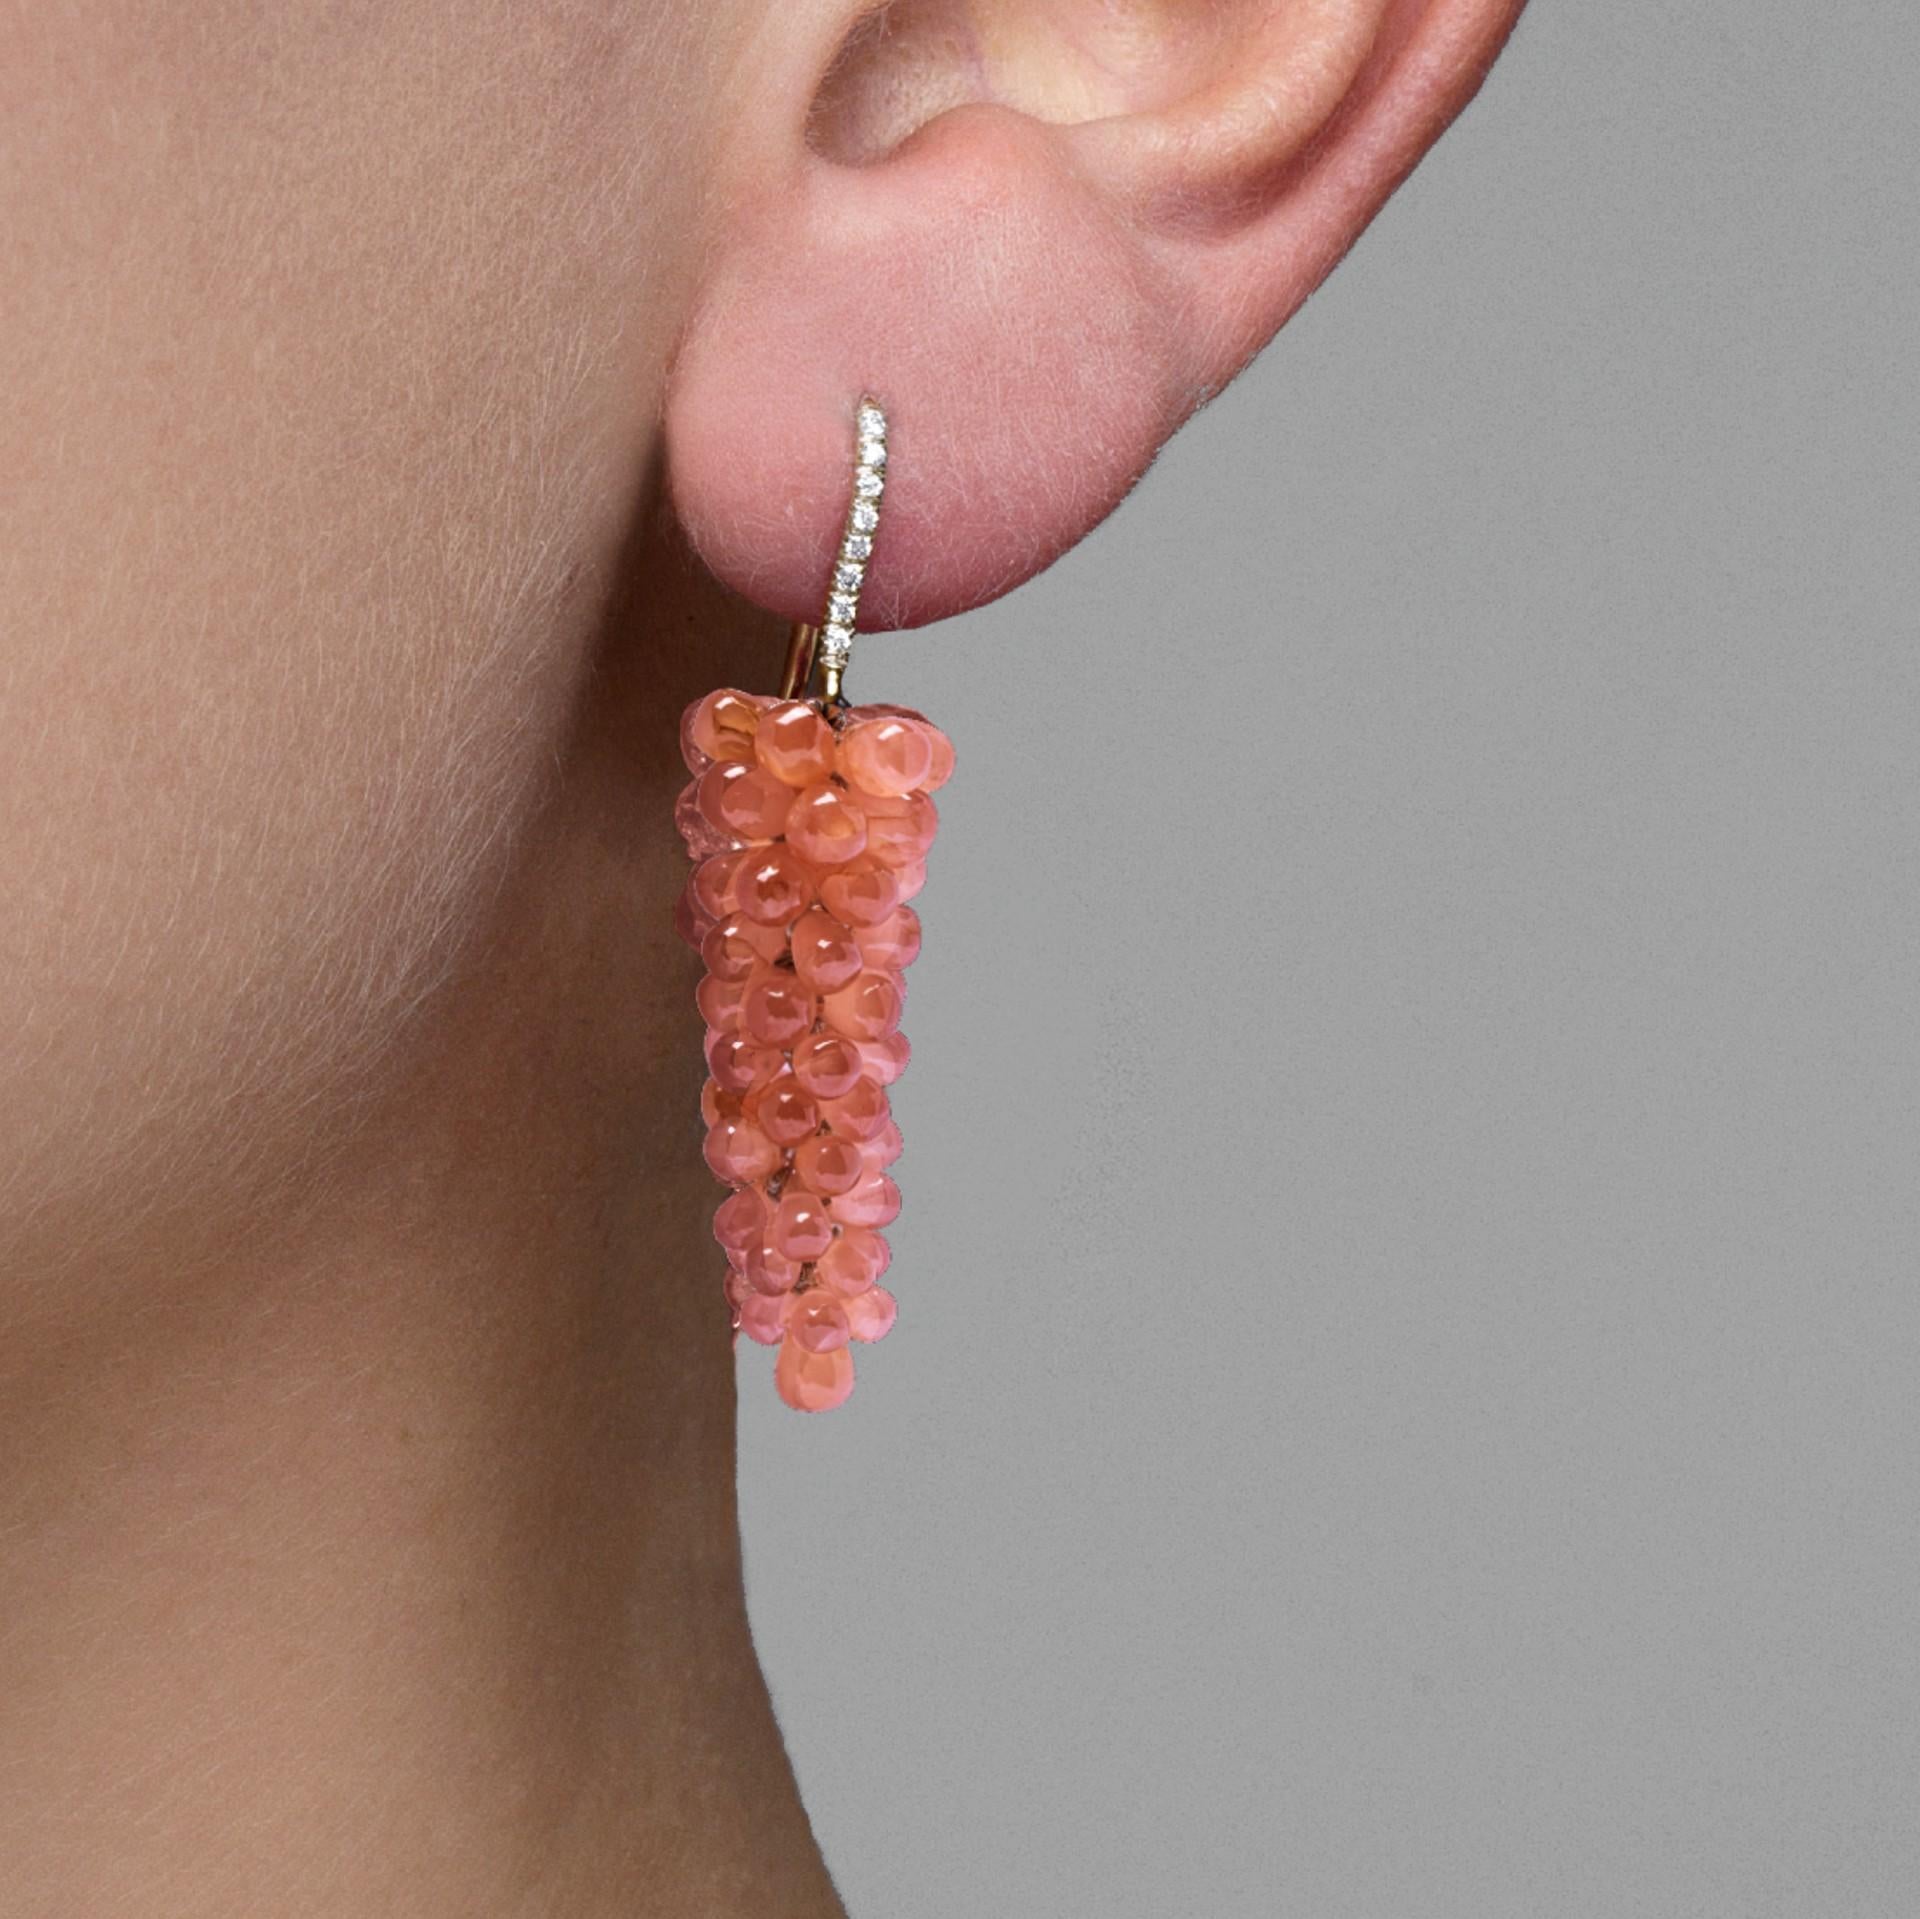 Alex Jona hand crafted in Italy, 18 karat rose gold pendant earrings, featuring two rhodochrosite clusters  weighing 25.45 carats and set with 0.10 carats of white diamonds. 

Alex Jona jewels stand out, not only for their special design and for the